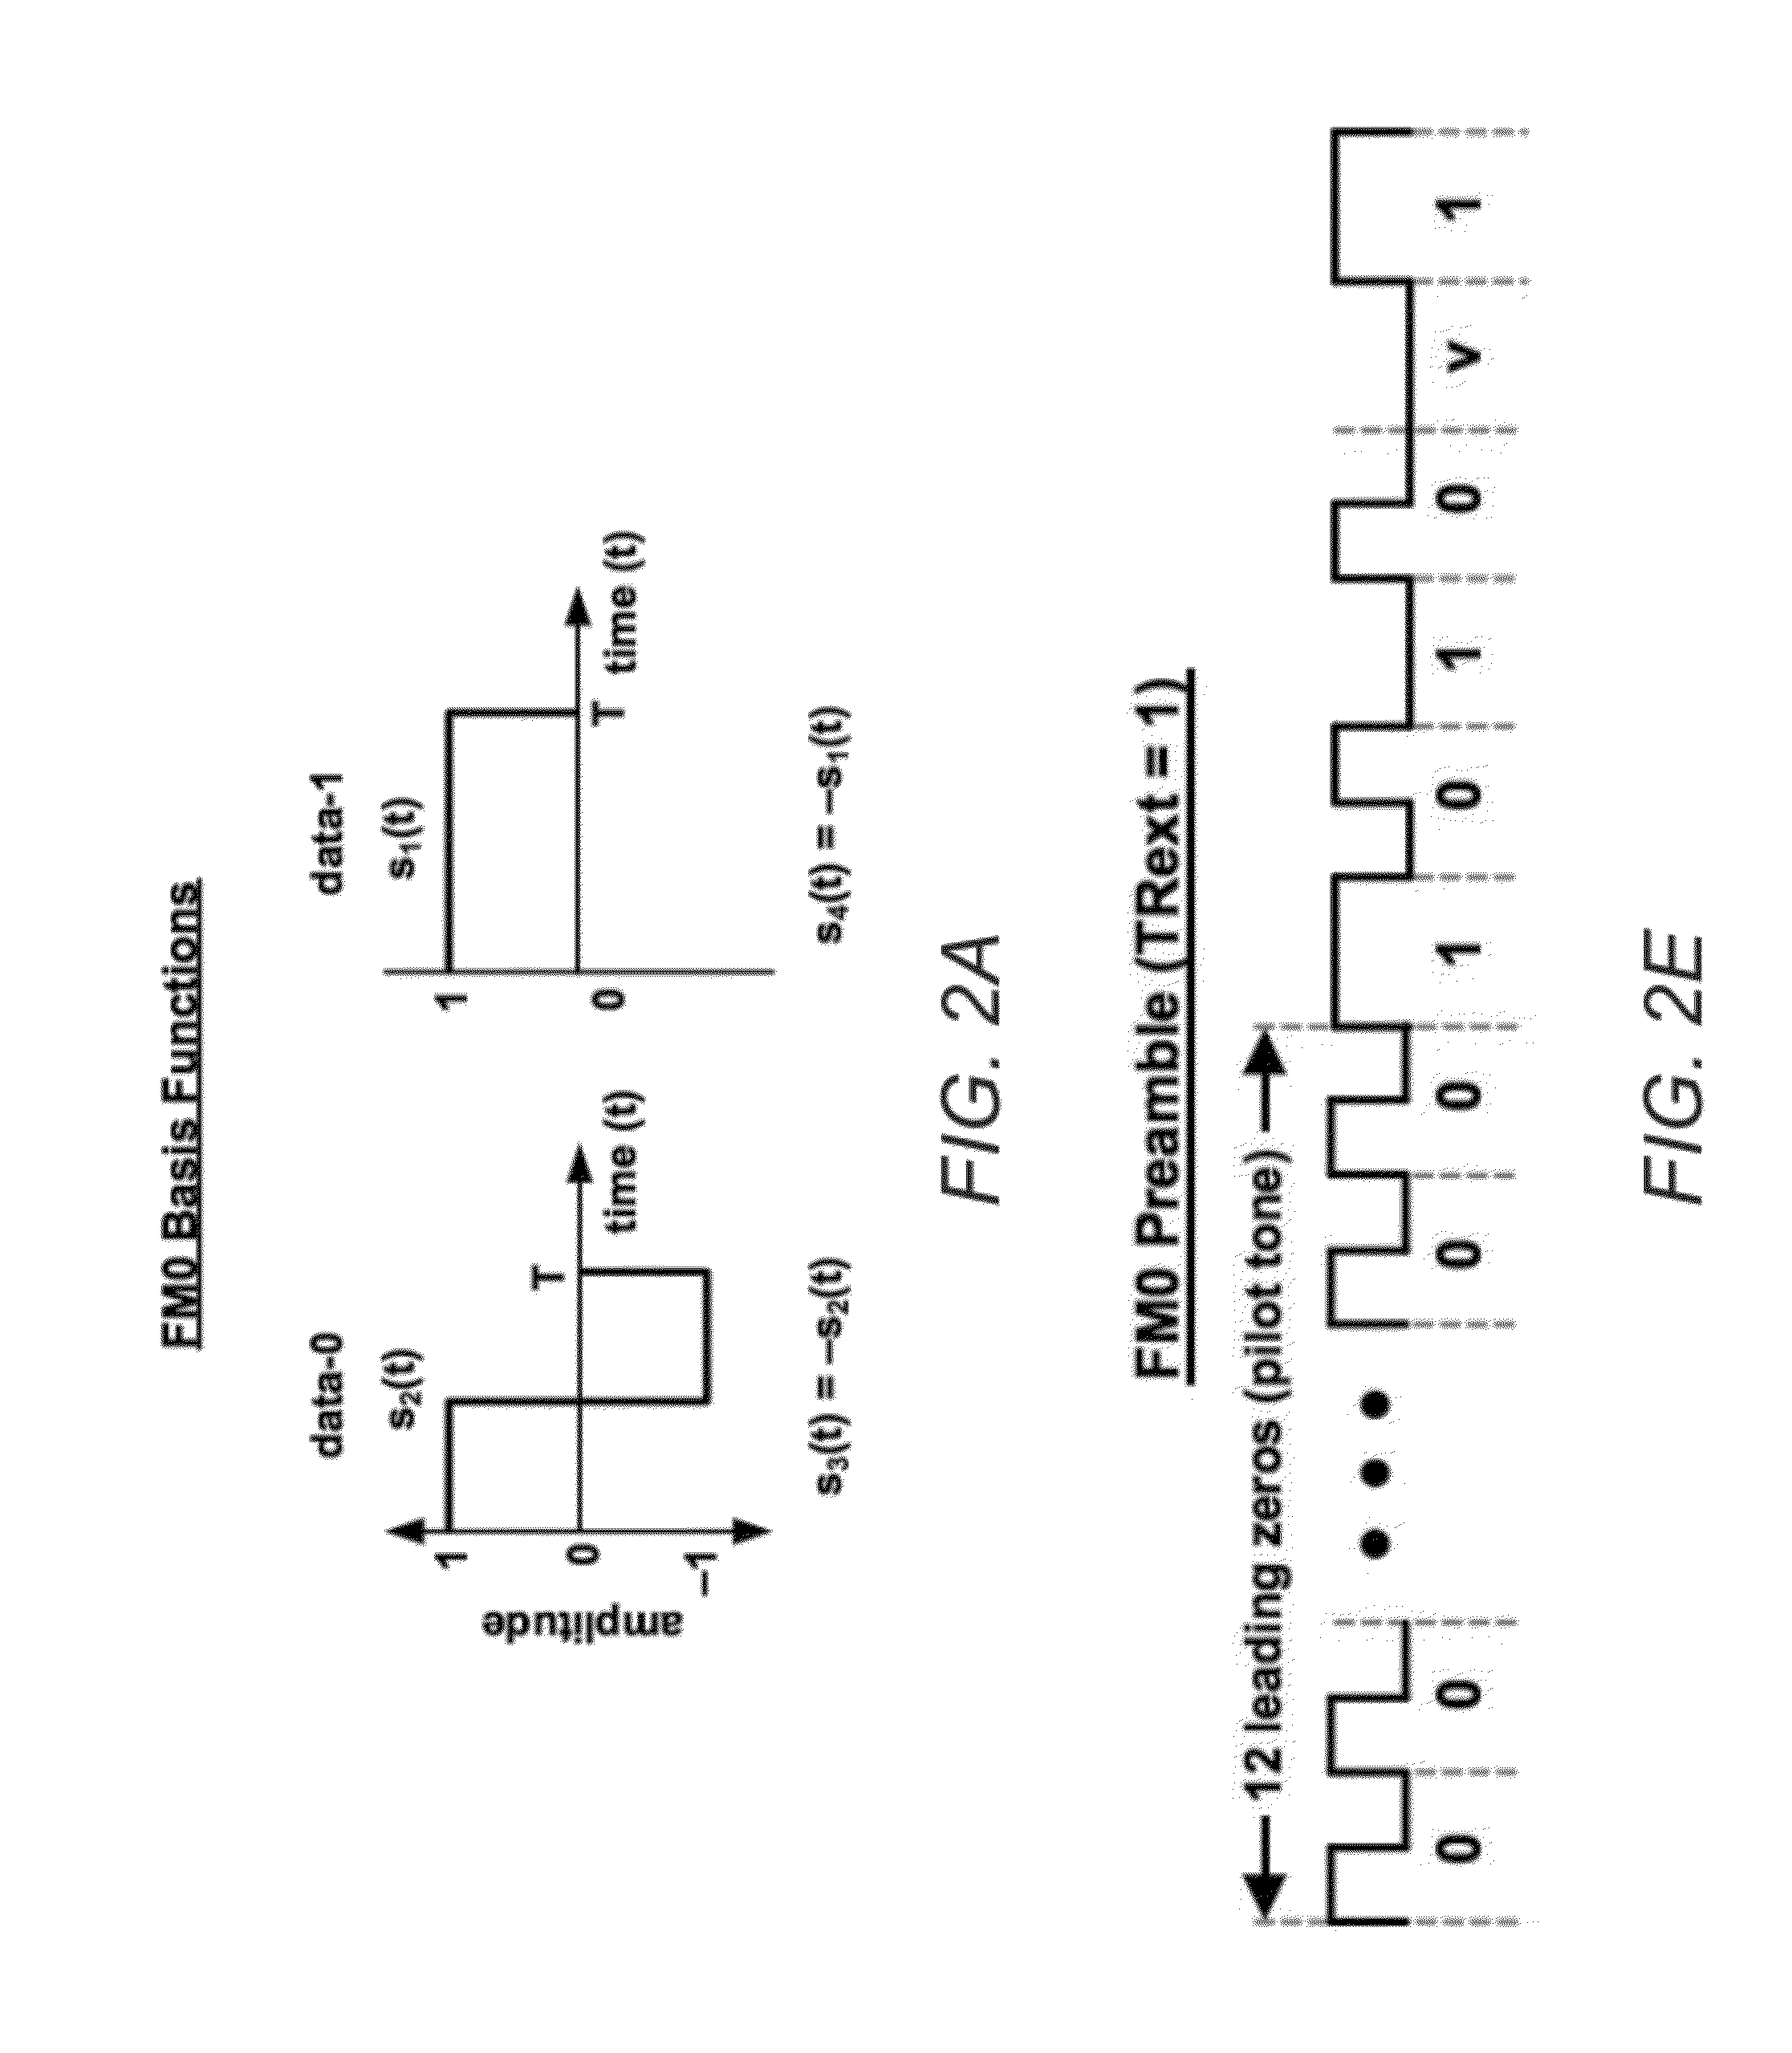 Multiple symbol noncoherent soft output detector